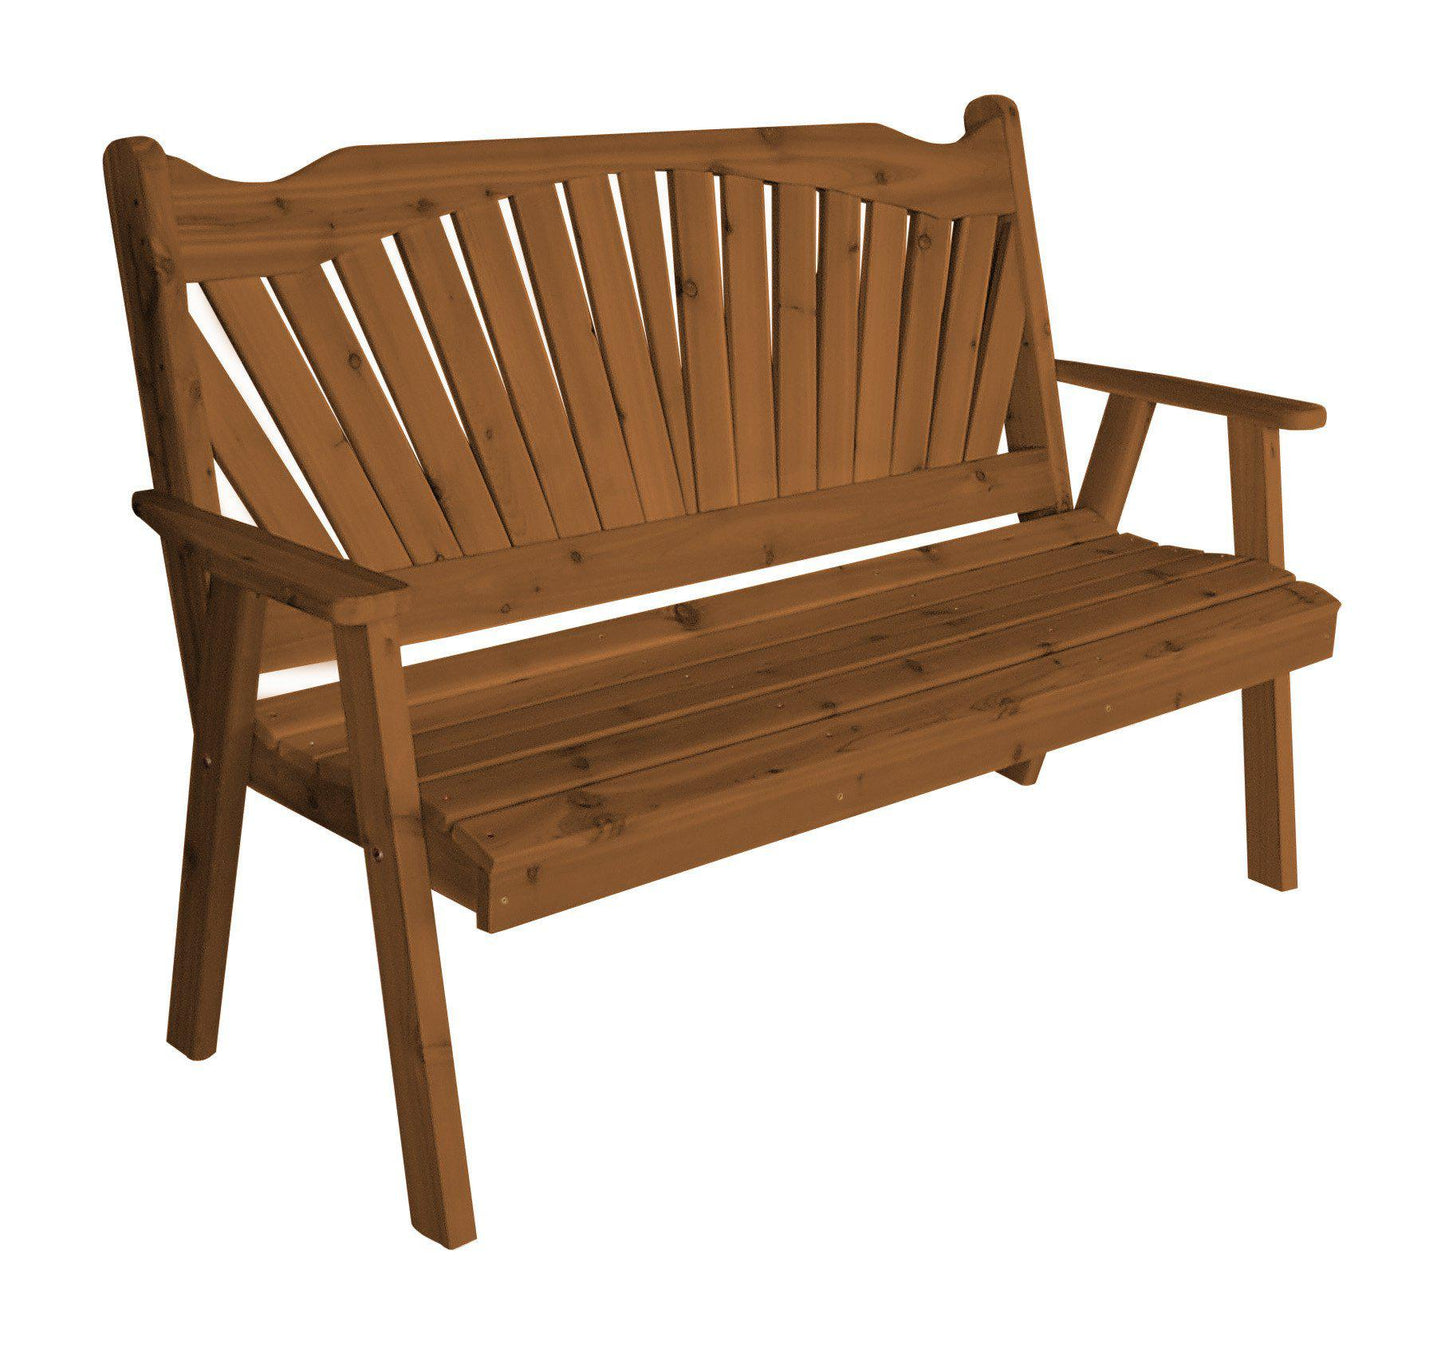 A&L Furniture Co. Western Red Cedar 5' Fanback Garden Bench - LEAD TIME TO SHIP 4 WEEKS OR LESS